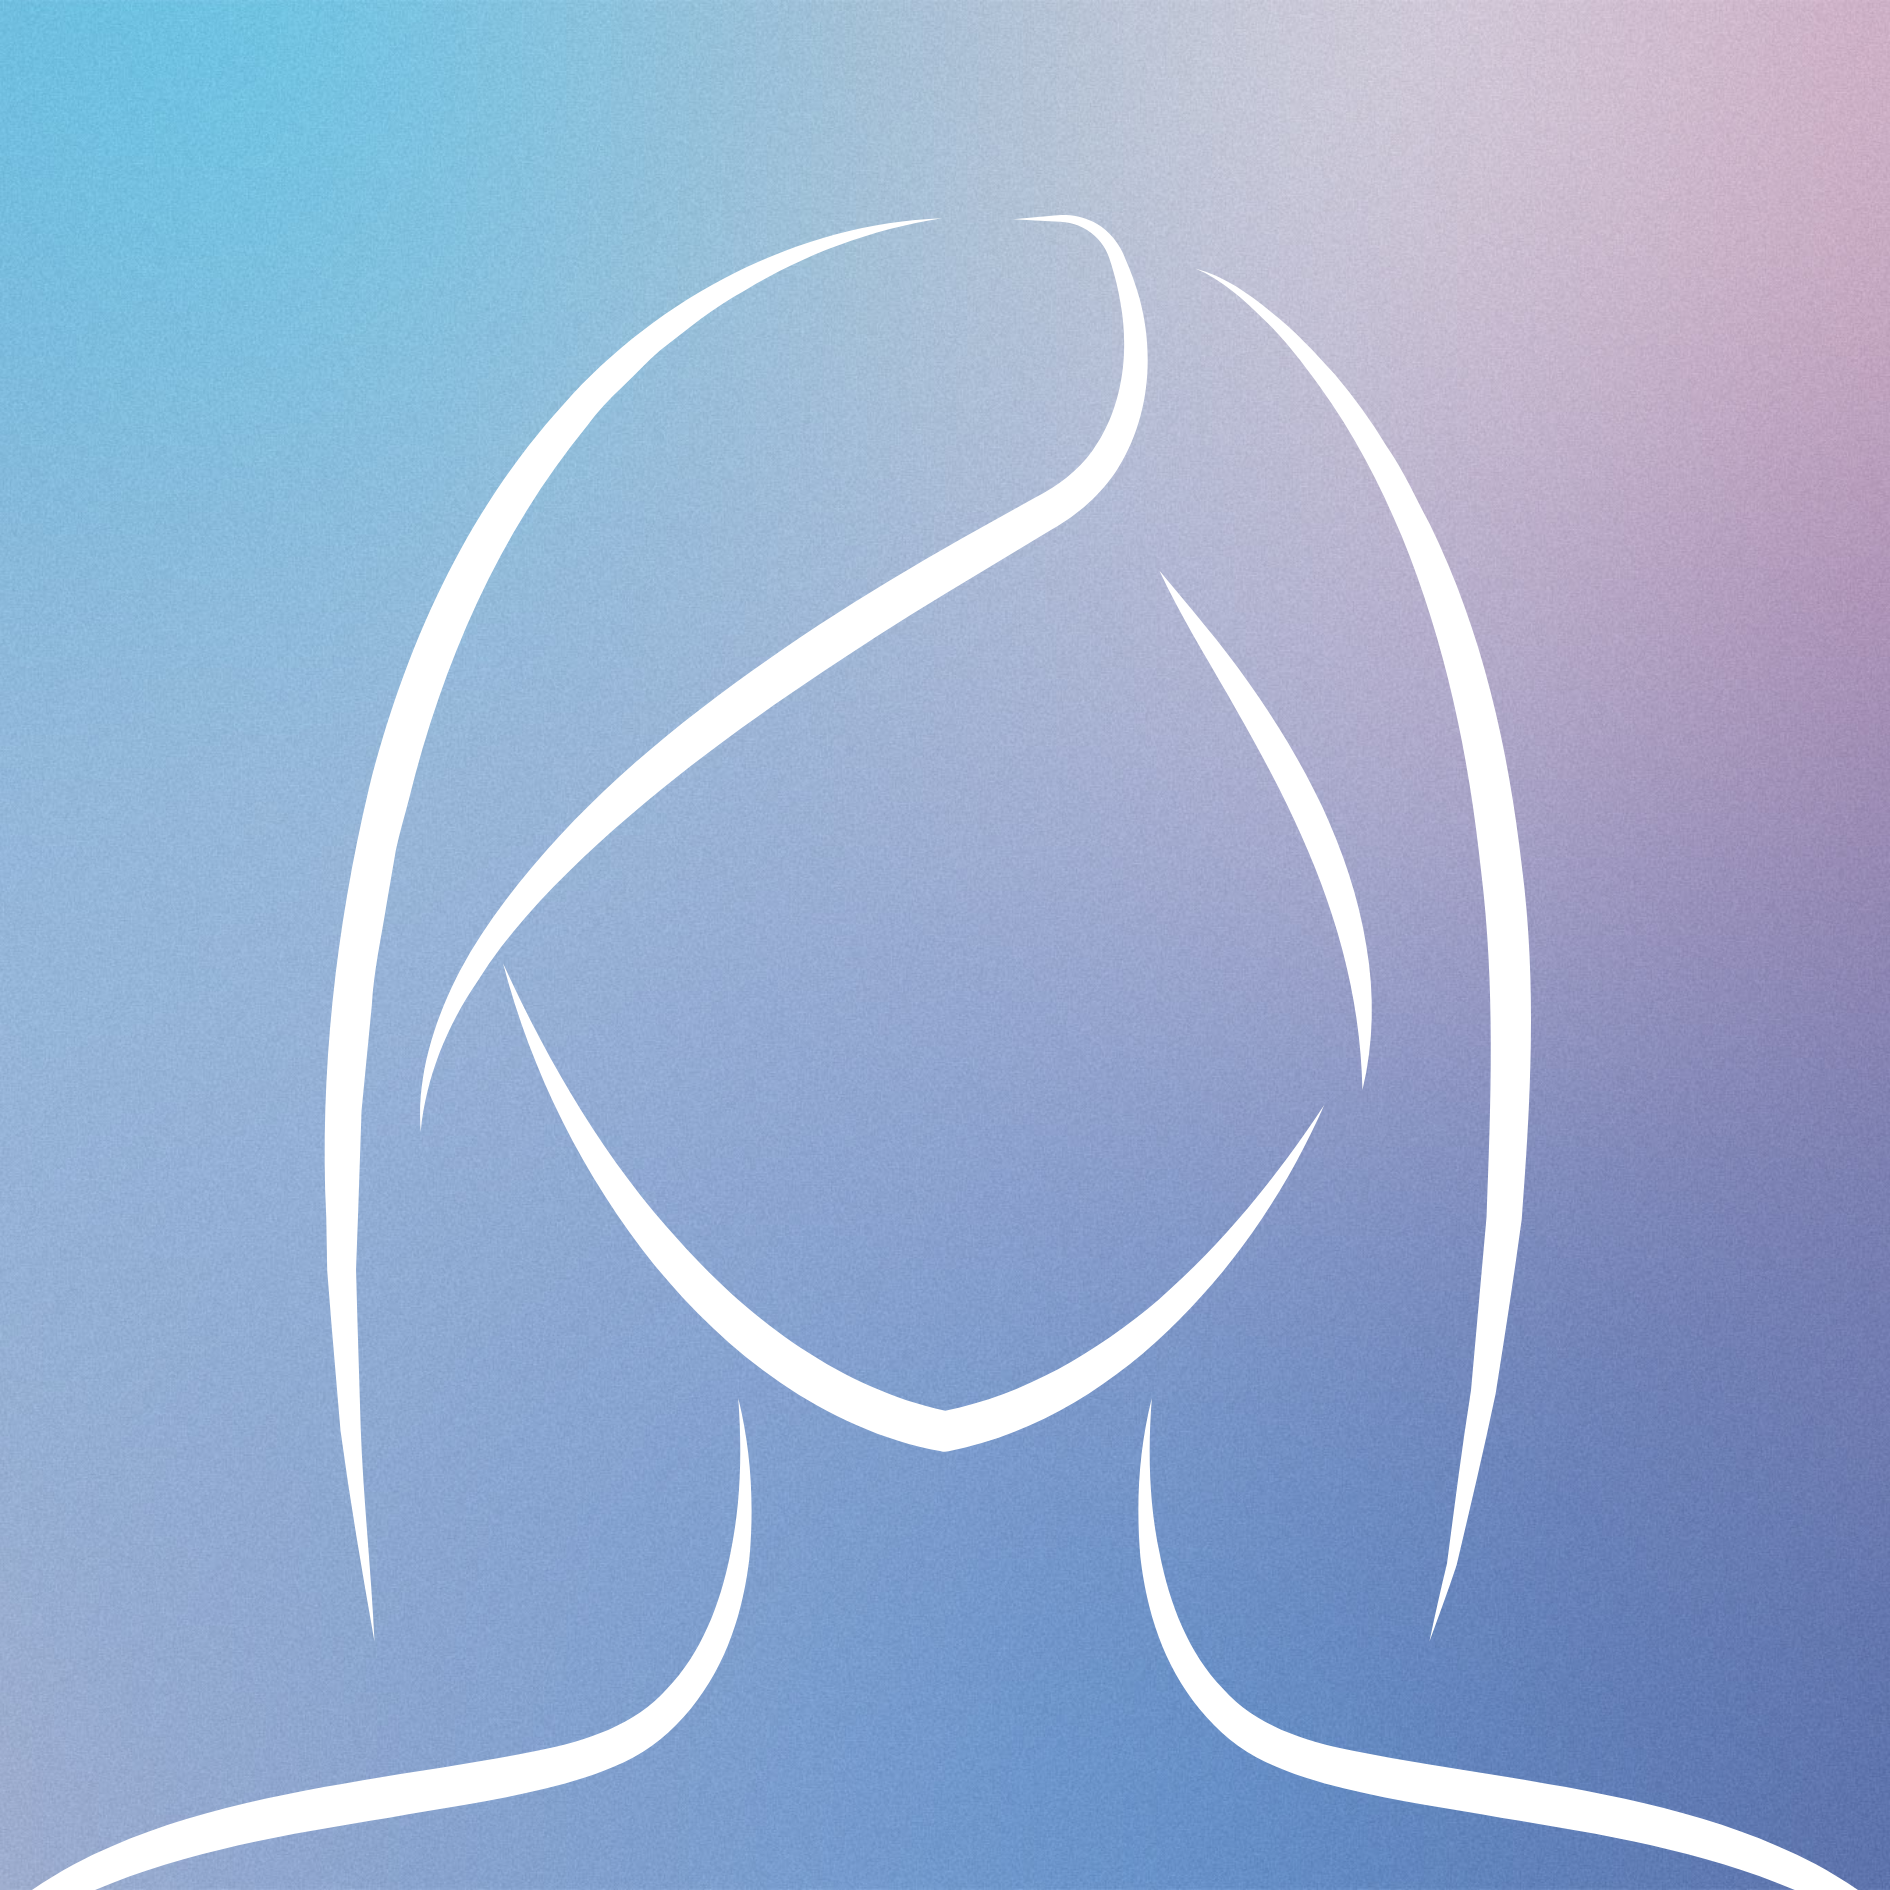 Silhouette of an anonymous female profile against a blue-purple background for SEO and accessibility.